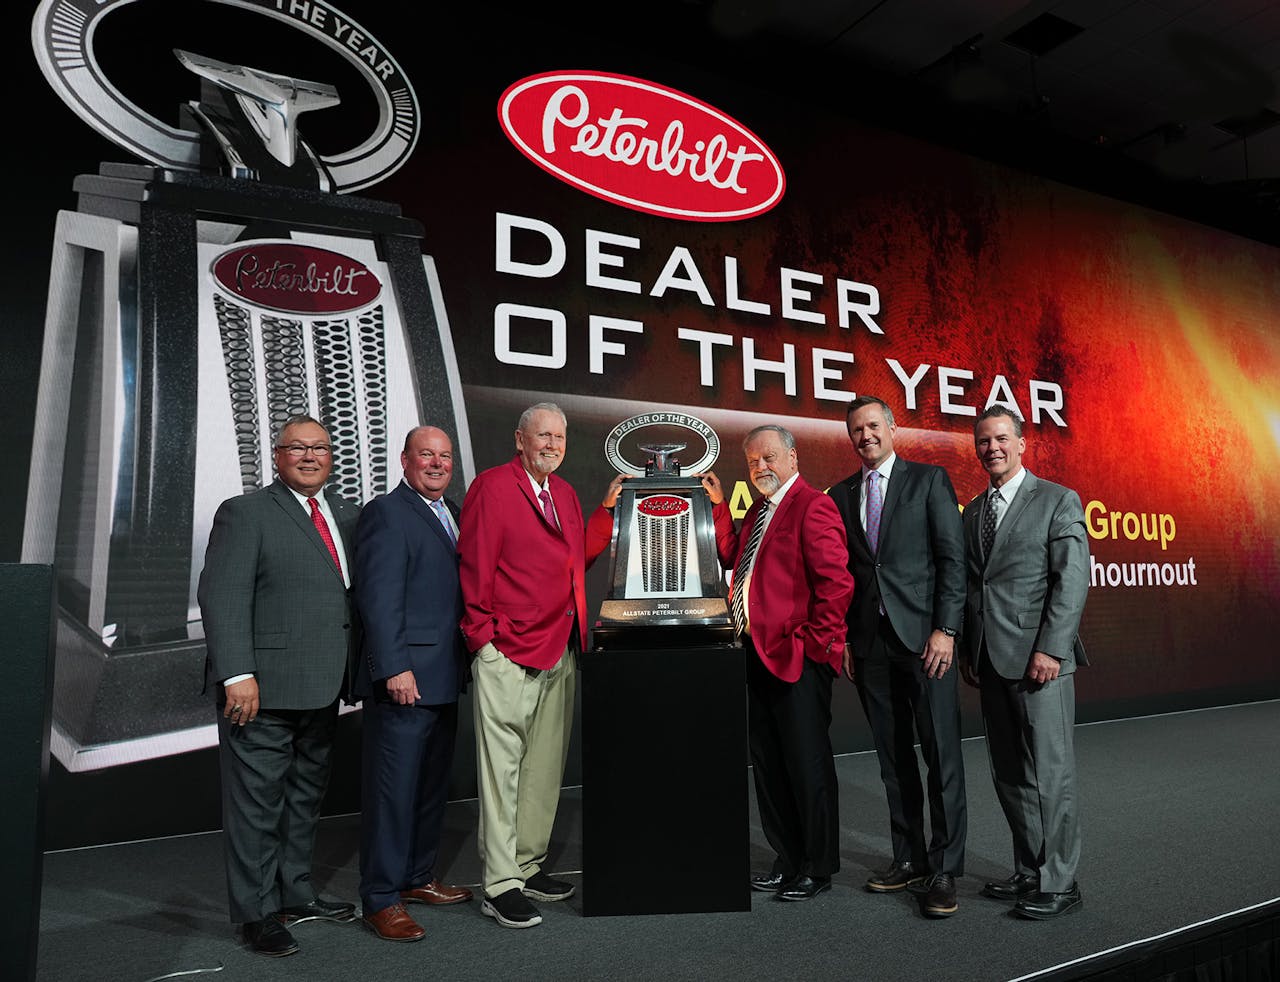 Allstate Peterbilt takes home big honor | Peterbilt Motors Company earlier this month named Allstate Peterbilt Group as the 2021 North American Dealer of the Year at their annual Dealer Meeting, held in Phoenix, Arizona. The annual award is given to the dealer group that best represents the manufacturer's 'commitment to excellence and the never-ending pursuit of driving customer uptime,' Peterbilt said. Since joining the Peterbilt dealer ranks 50 years ago, 'with a single location in South St. Paul, Minnesota, Allstate Peterbilt Group has grown to 23 locations across five states,' said Jason Skoog, Paccar Vice President and Peterbilt General Manager. In addition, Allstate also received the 2021 Paccar MX Engine Dealer Group of the Year award for sales efforts and 'strong aftermarket support,' Peterbilt said. It's the third consecutive year Allstate's taken home that award. All told, this is Allstate's third Dealer Group of the Year award, following 2017 and 2012 wins. Pictured here, from left: Peterbilt's Robert Woodall (assistant general manager, sales and marketing) and Peyton Harrell (director of dealer network development); Allstate's Don Larson (owner) and Jeff Vanthournout (president); and Peterbilt's Jason Skoog (general manager) and Leon Handt (assistant general manager, operations).